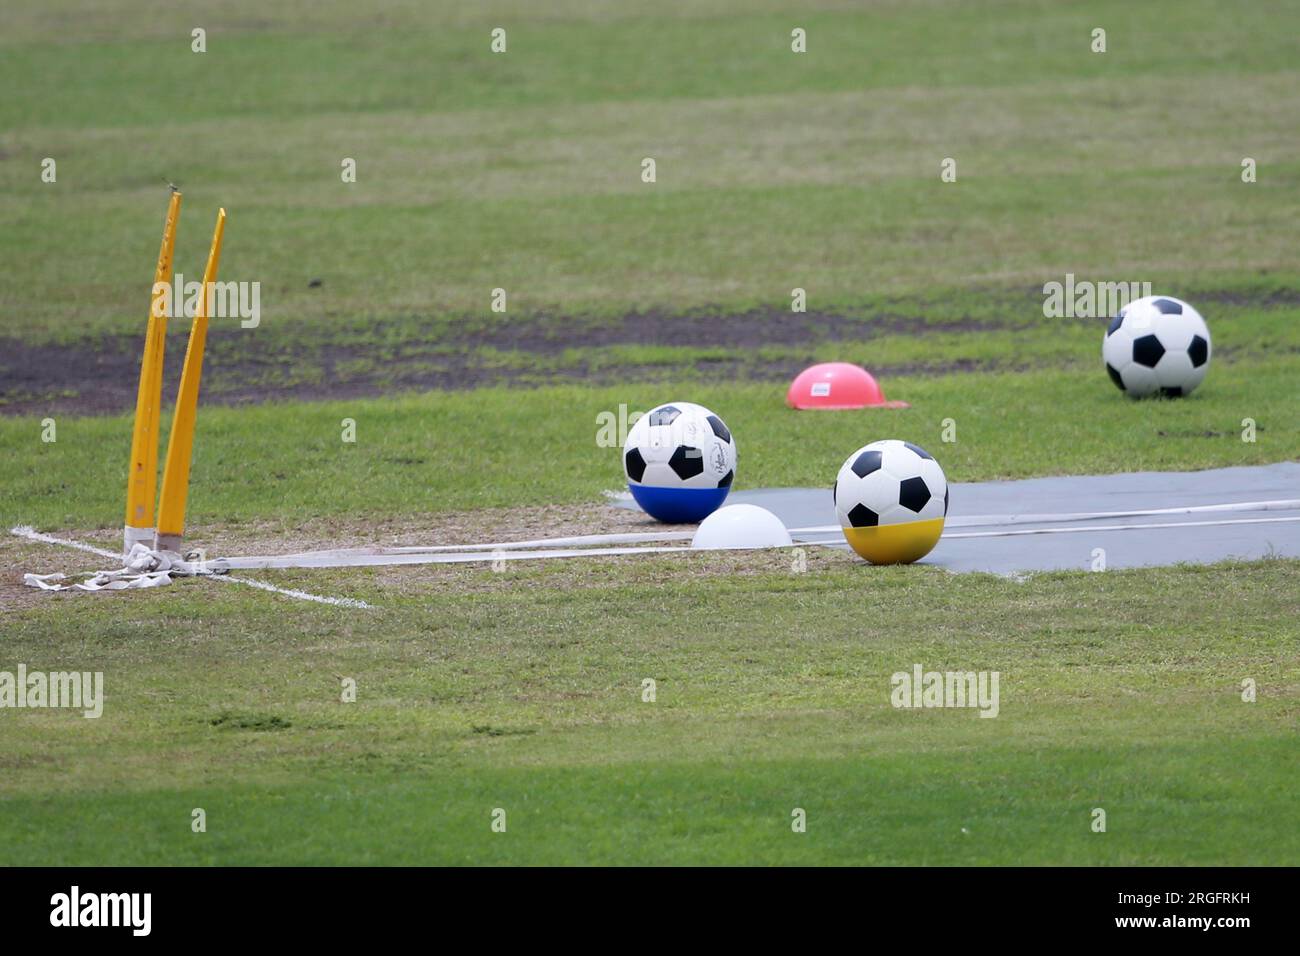 Bowling pitch decorated by football during Bangladeshi national ...